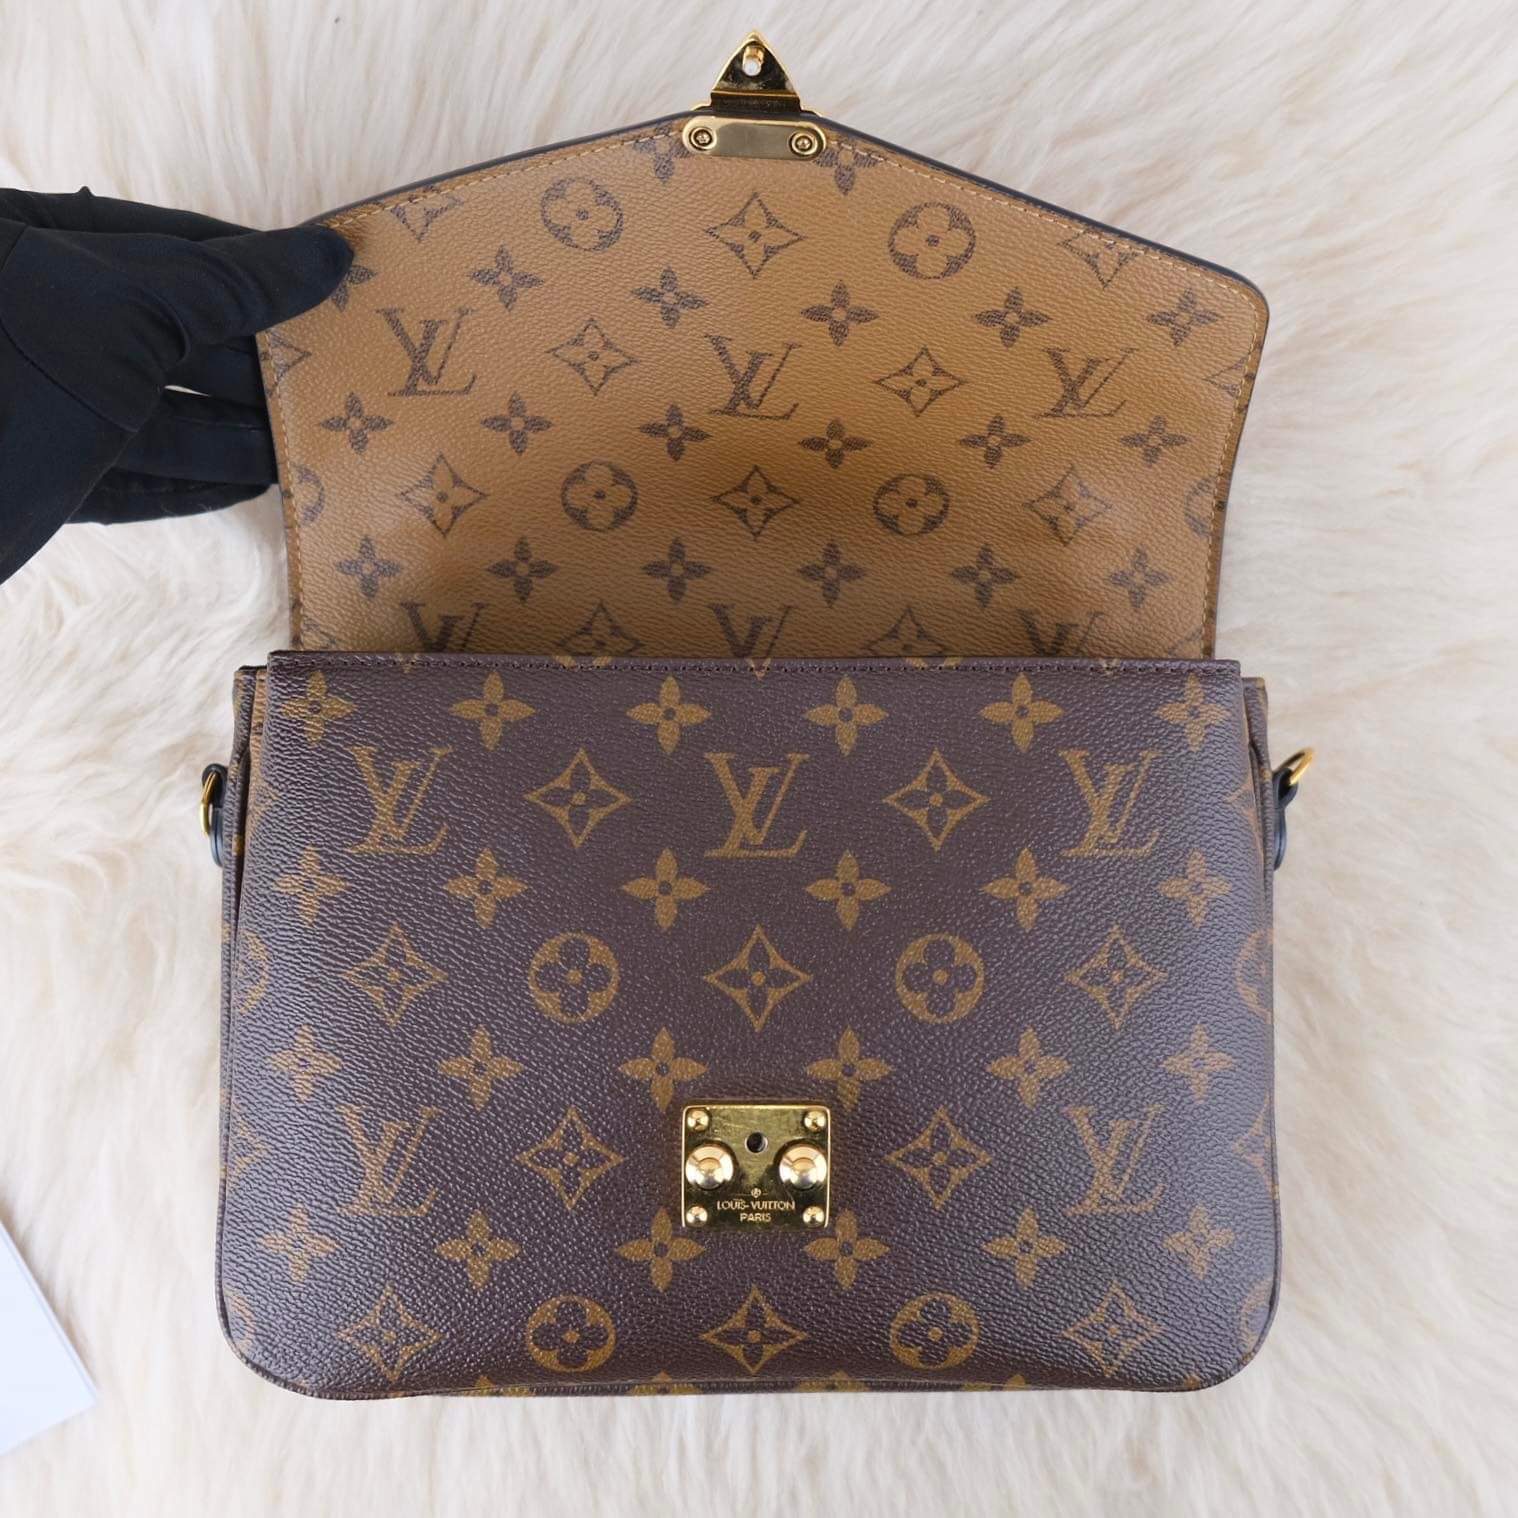 LOUIS VUITTON CLUNNY MINI UNBOXING  FIRST IMPRESSION & WHAT FITS 